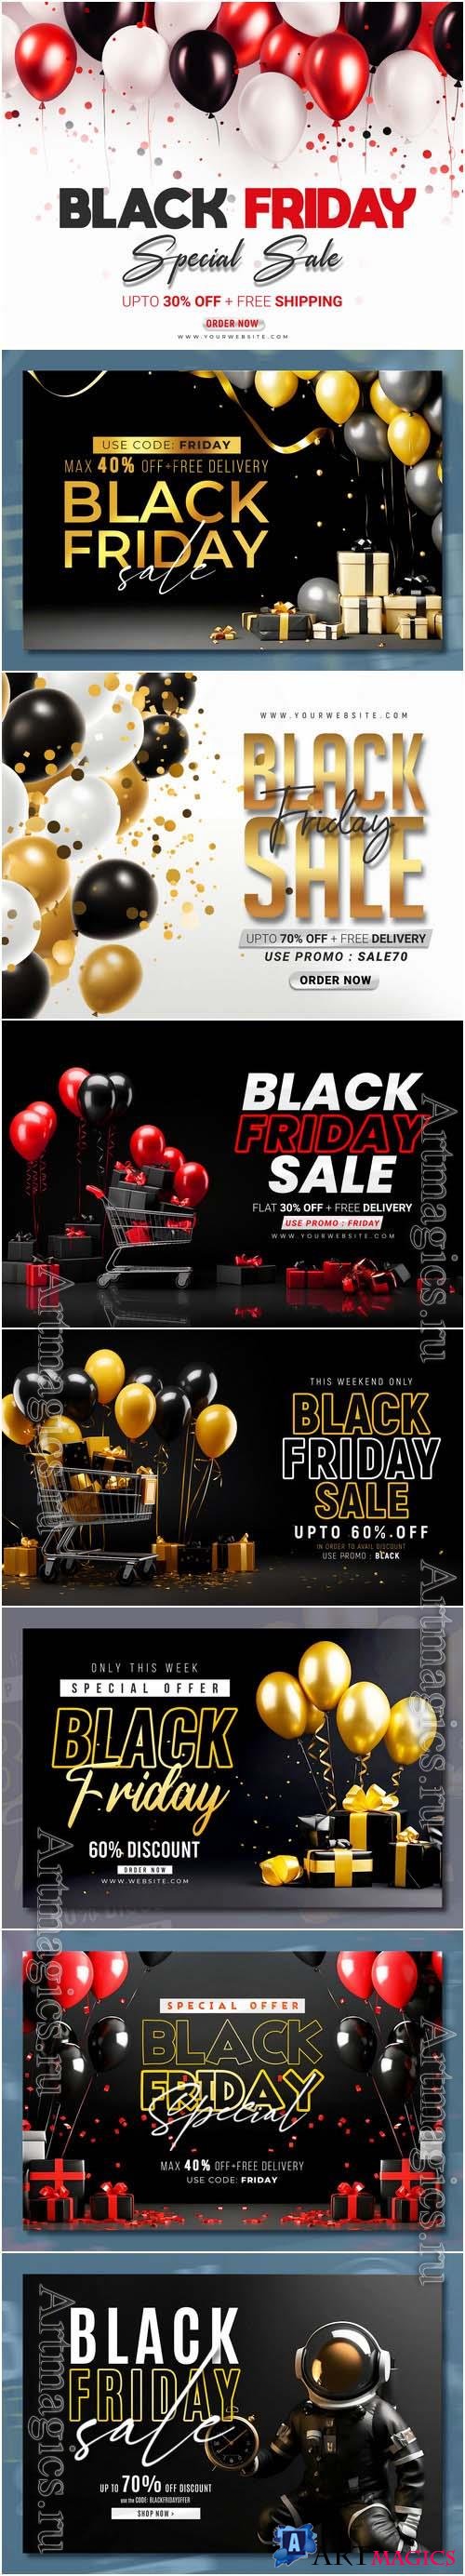 Black friday sale banner with realistic 3d gifts and balloons in psd vol 3